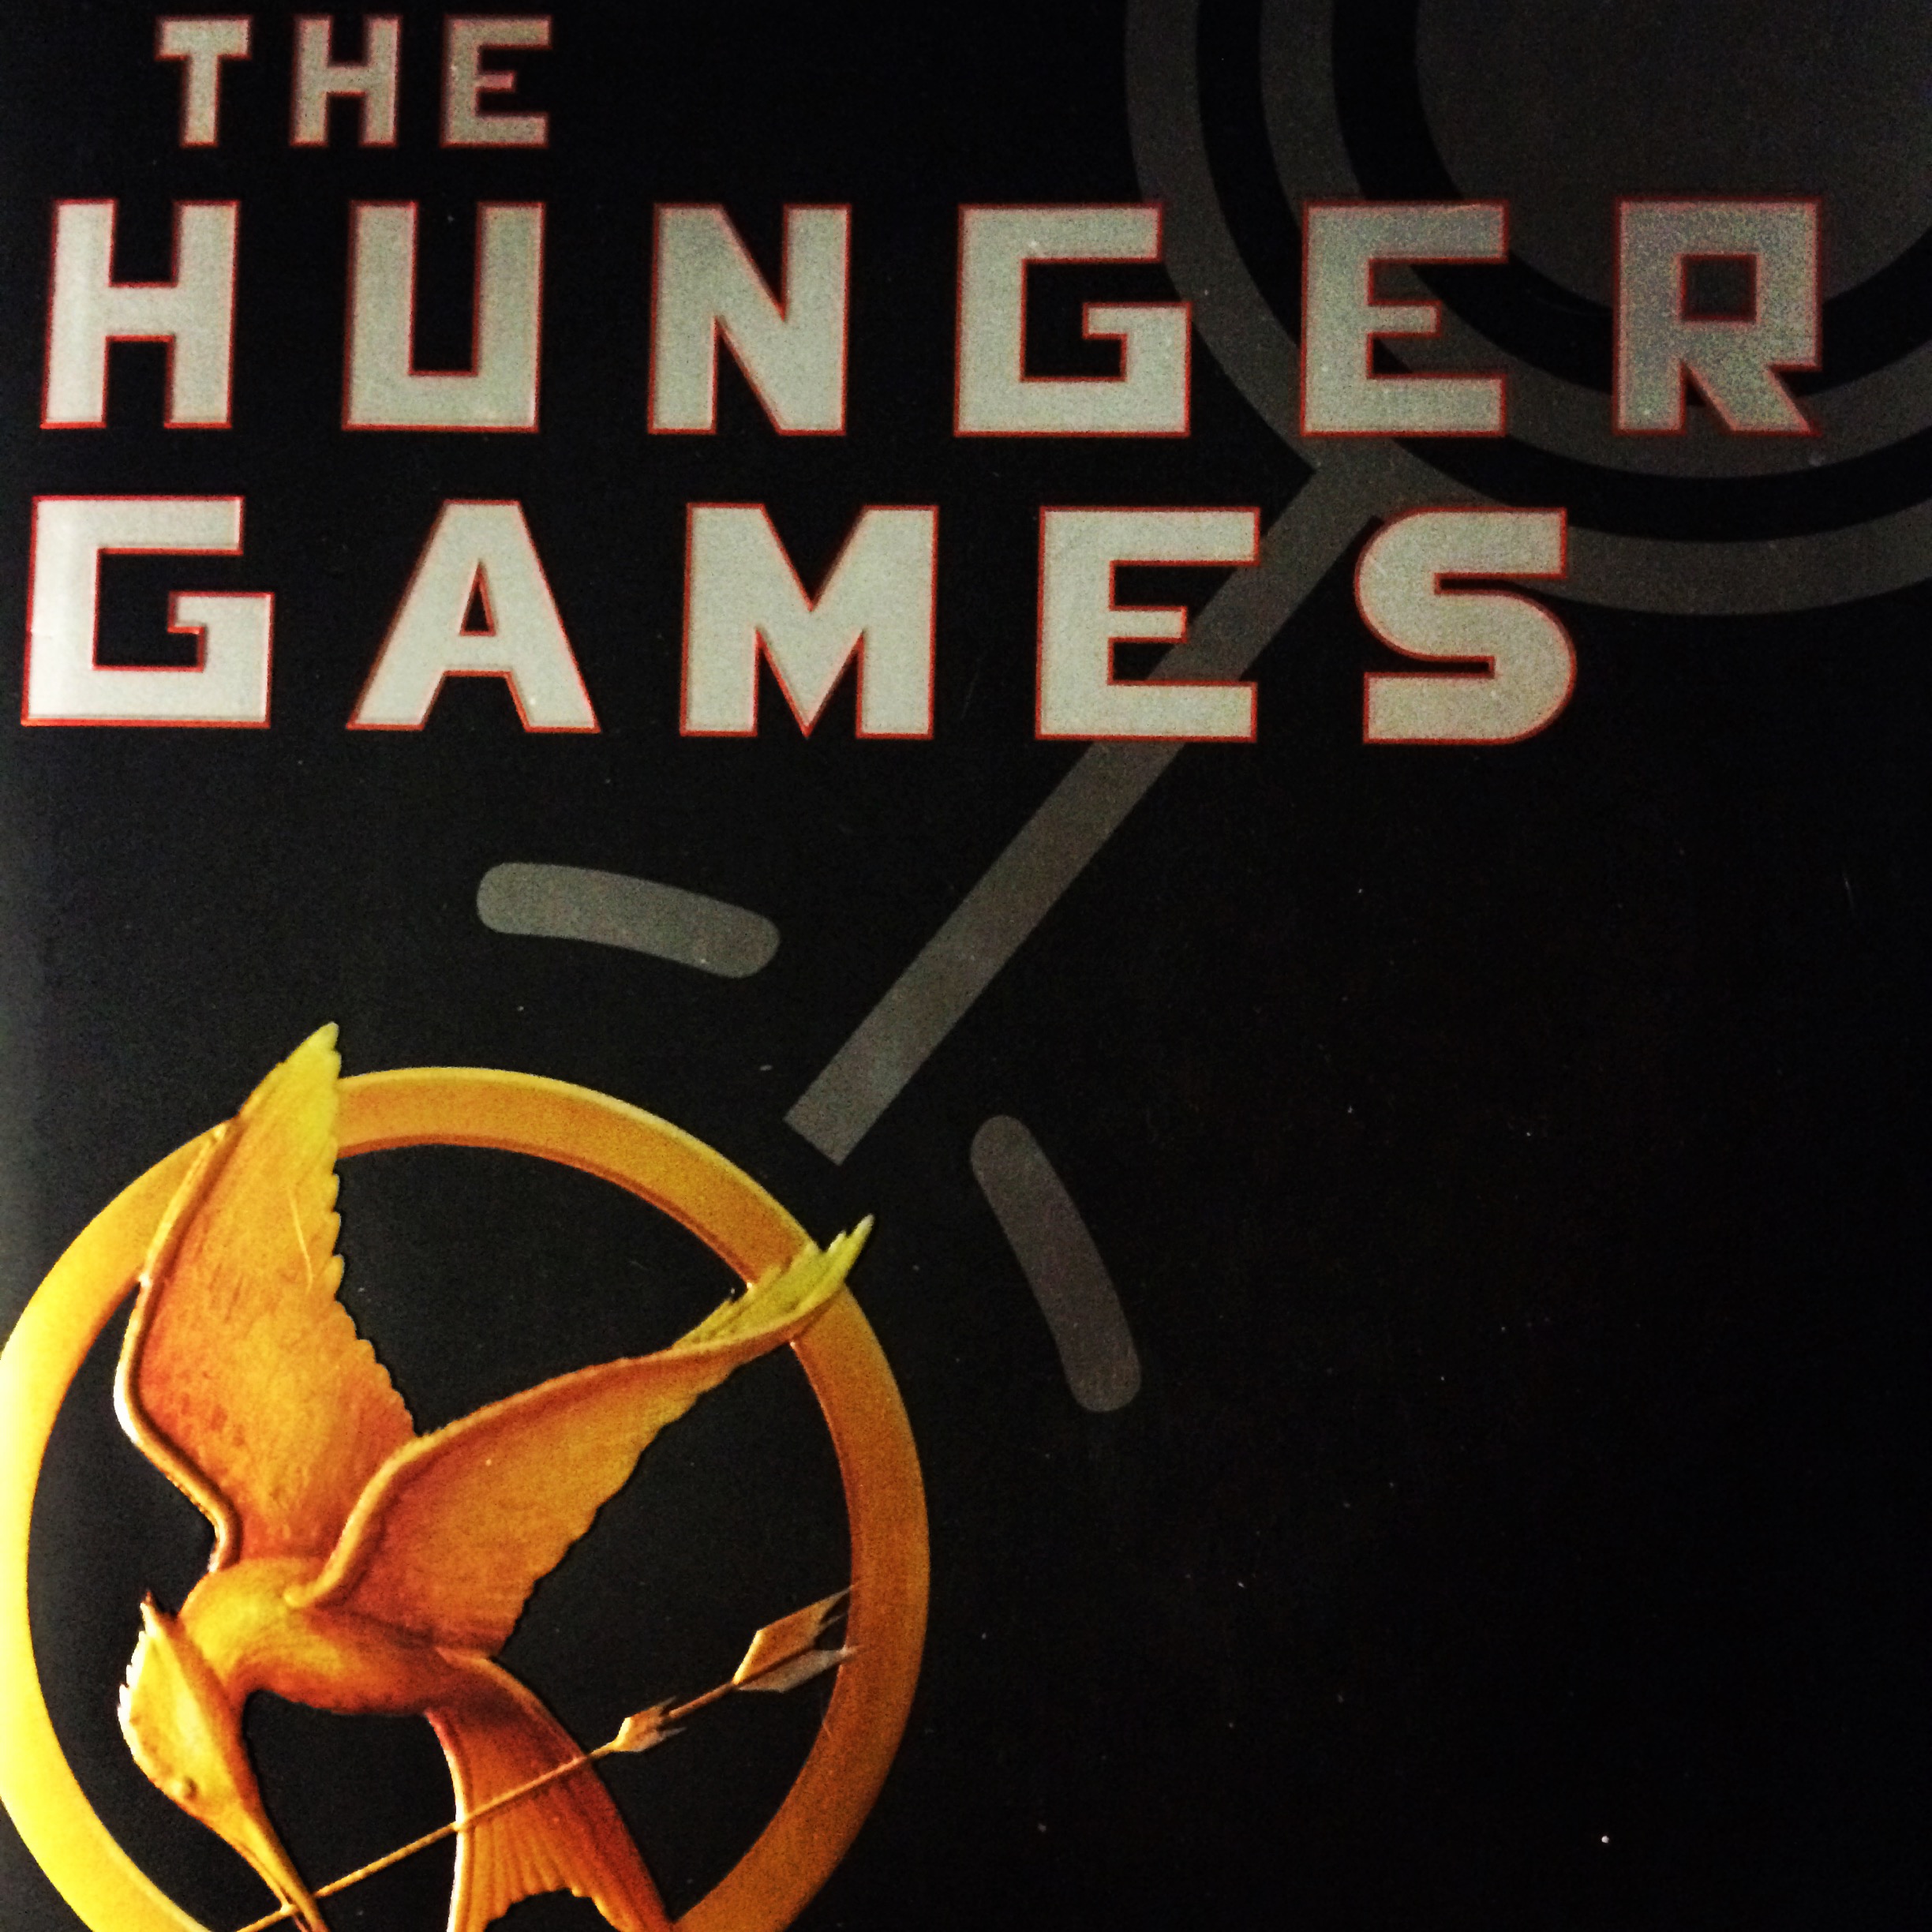 the hunger games by suzanne collins literature guide